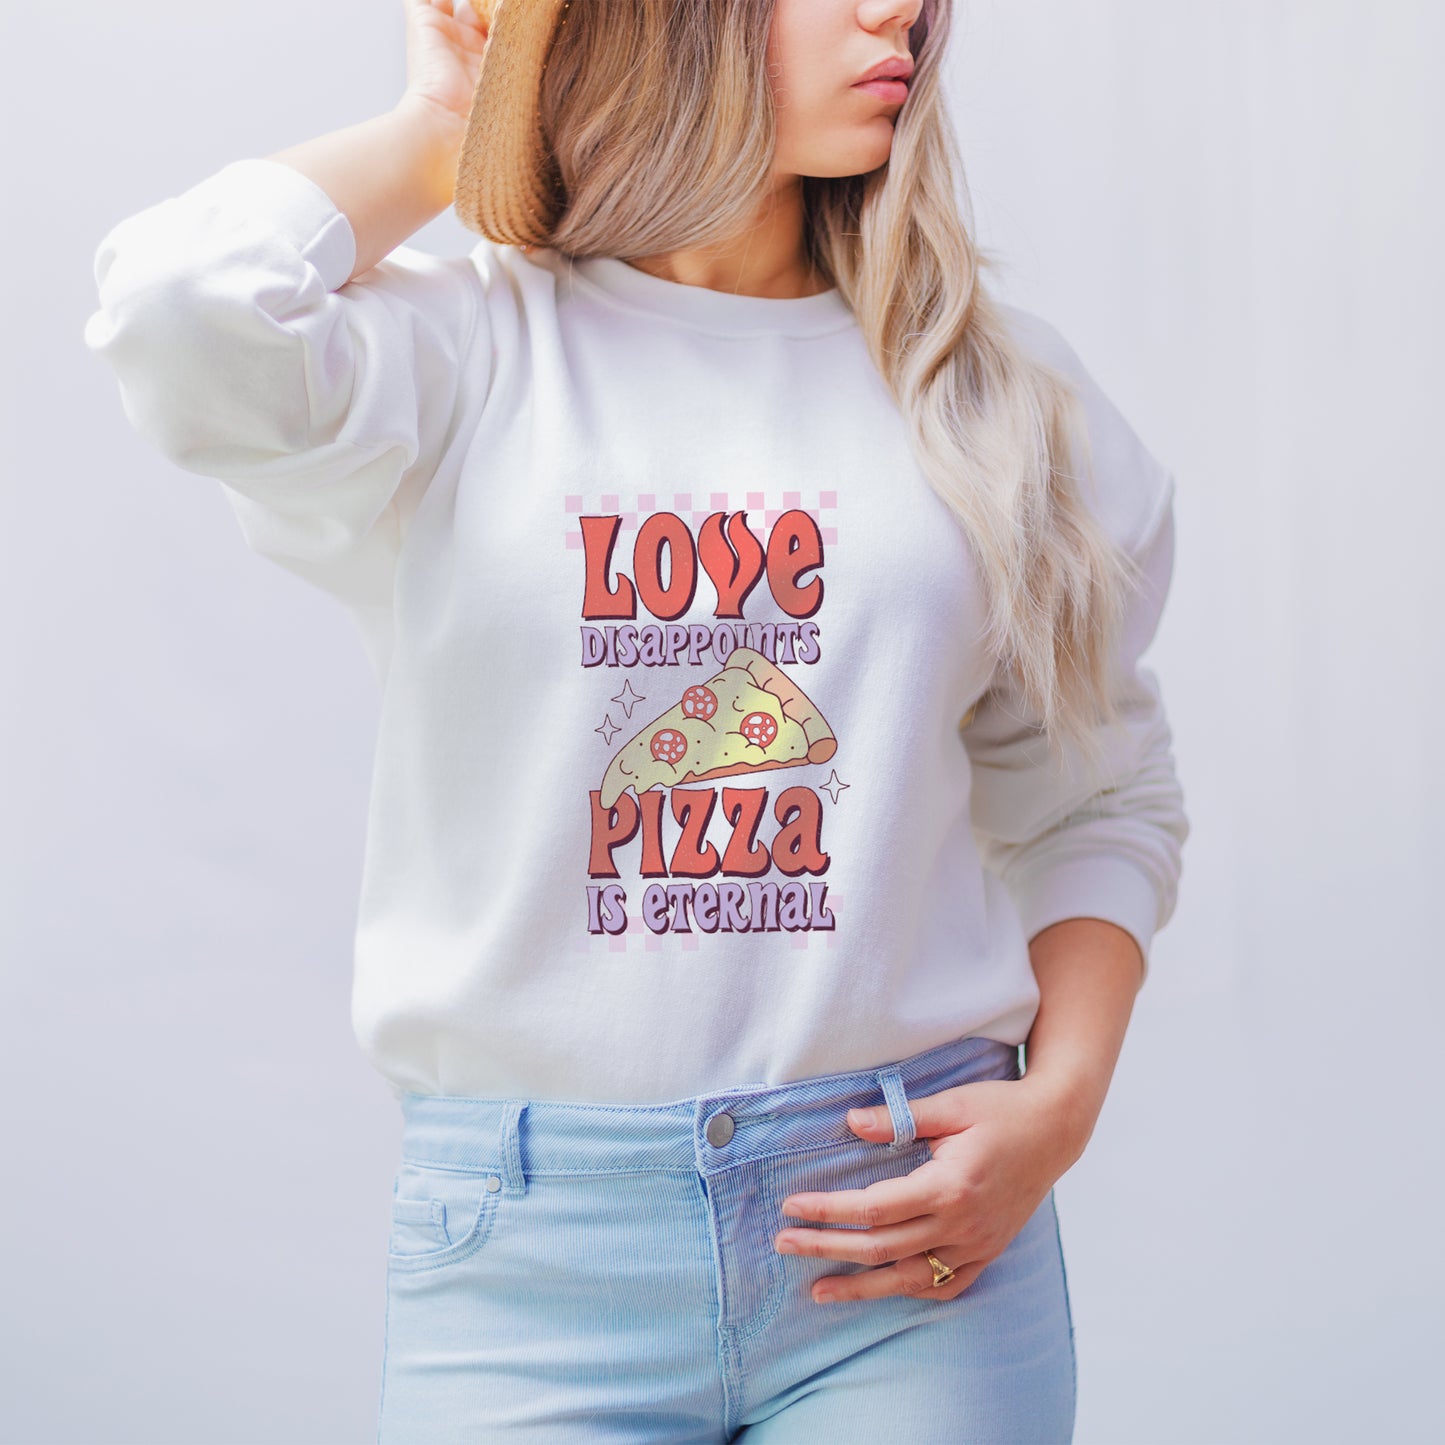 Retro Love disappoints pizza is eternal white jumper styled with jeans